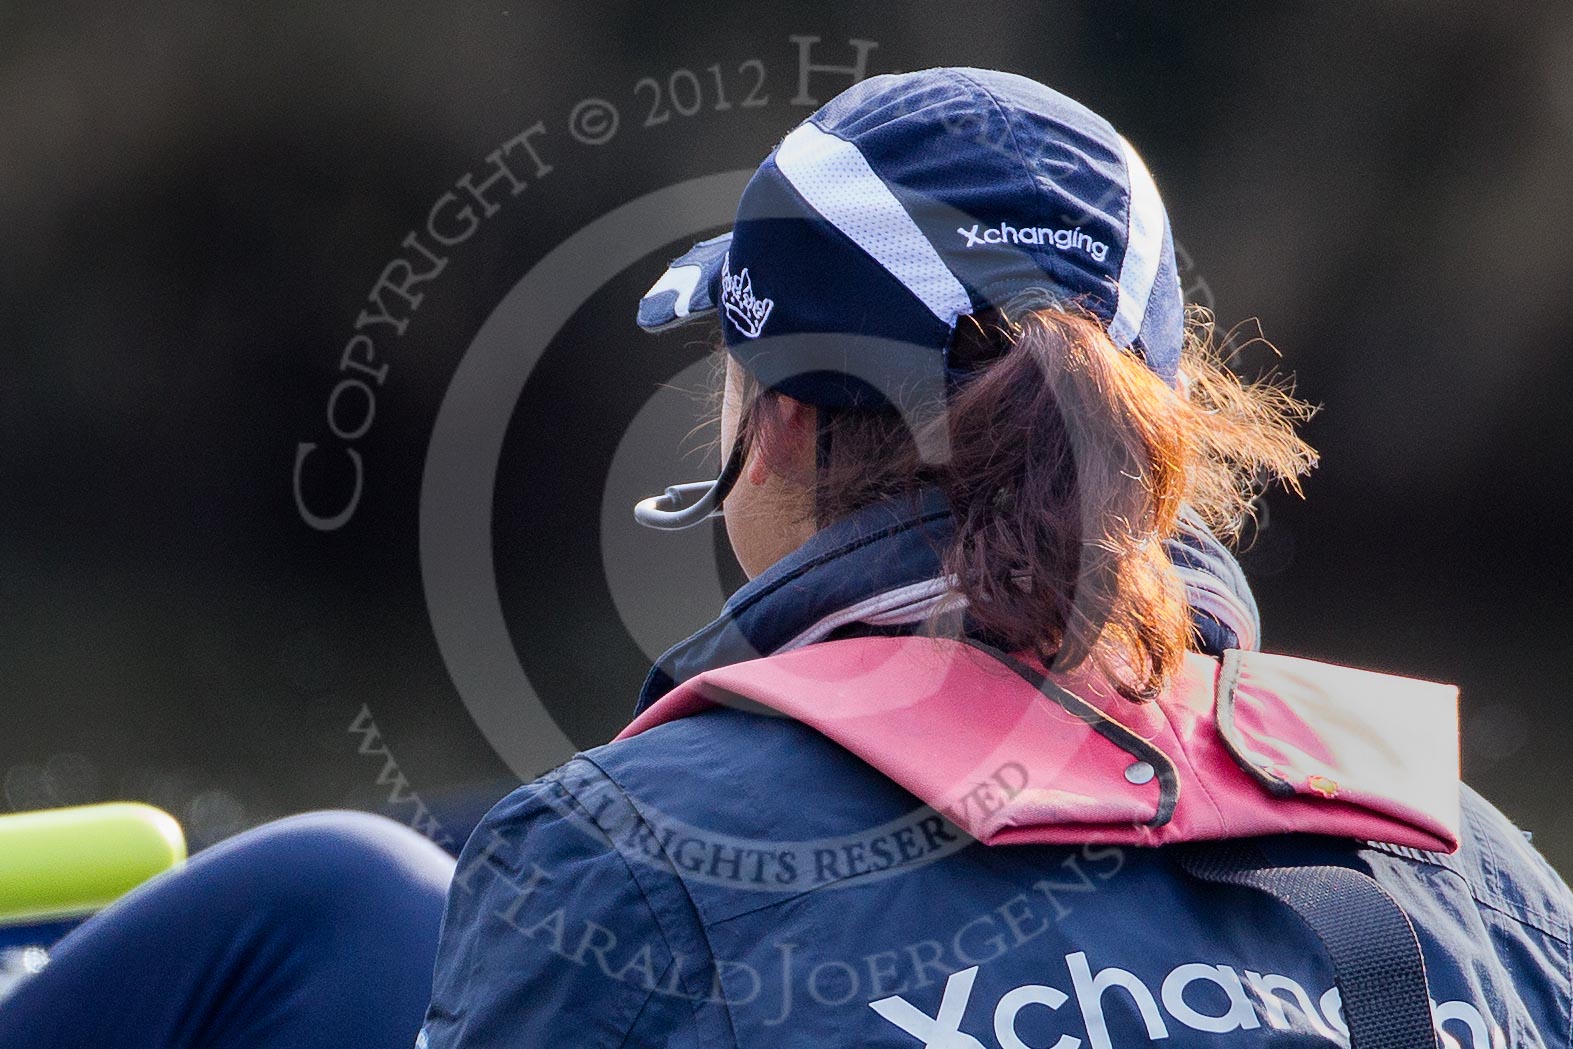 The Boat Race season 2012 - OUBC training: Close-up of cox Zoe de Toledo..


Oxfordshire,
United Kingdom,
on 20 March 2012 at 15:21, image #37